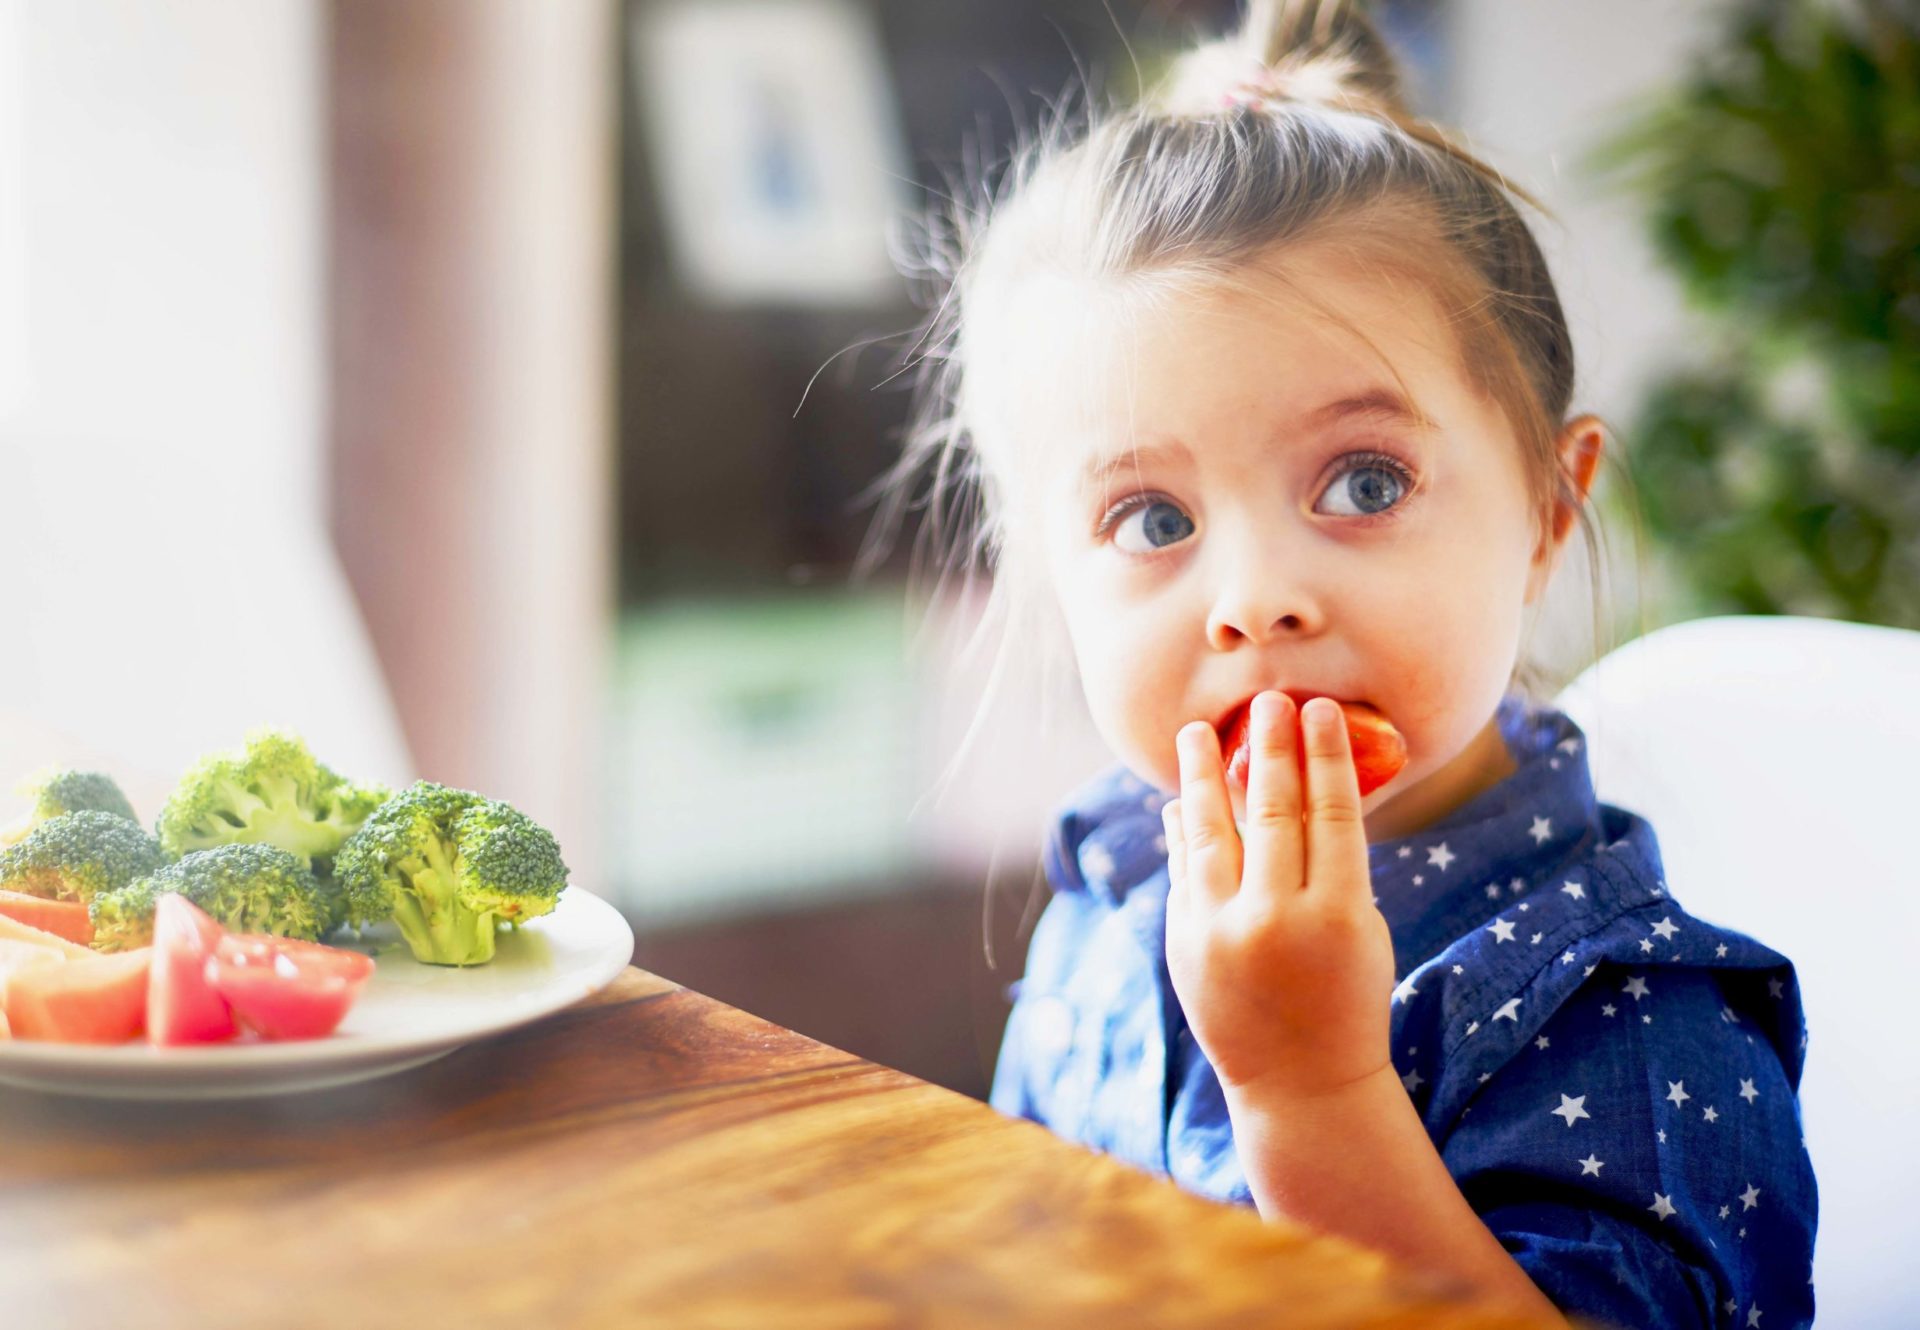 Young girl eating vegetables at kitchen table